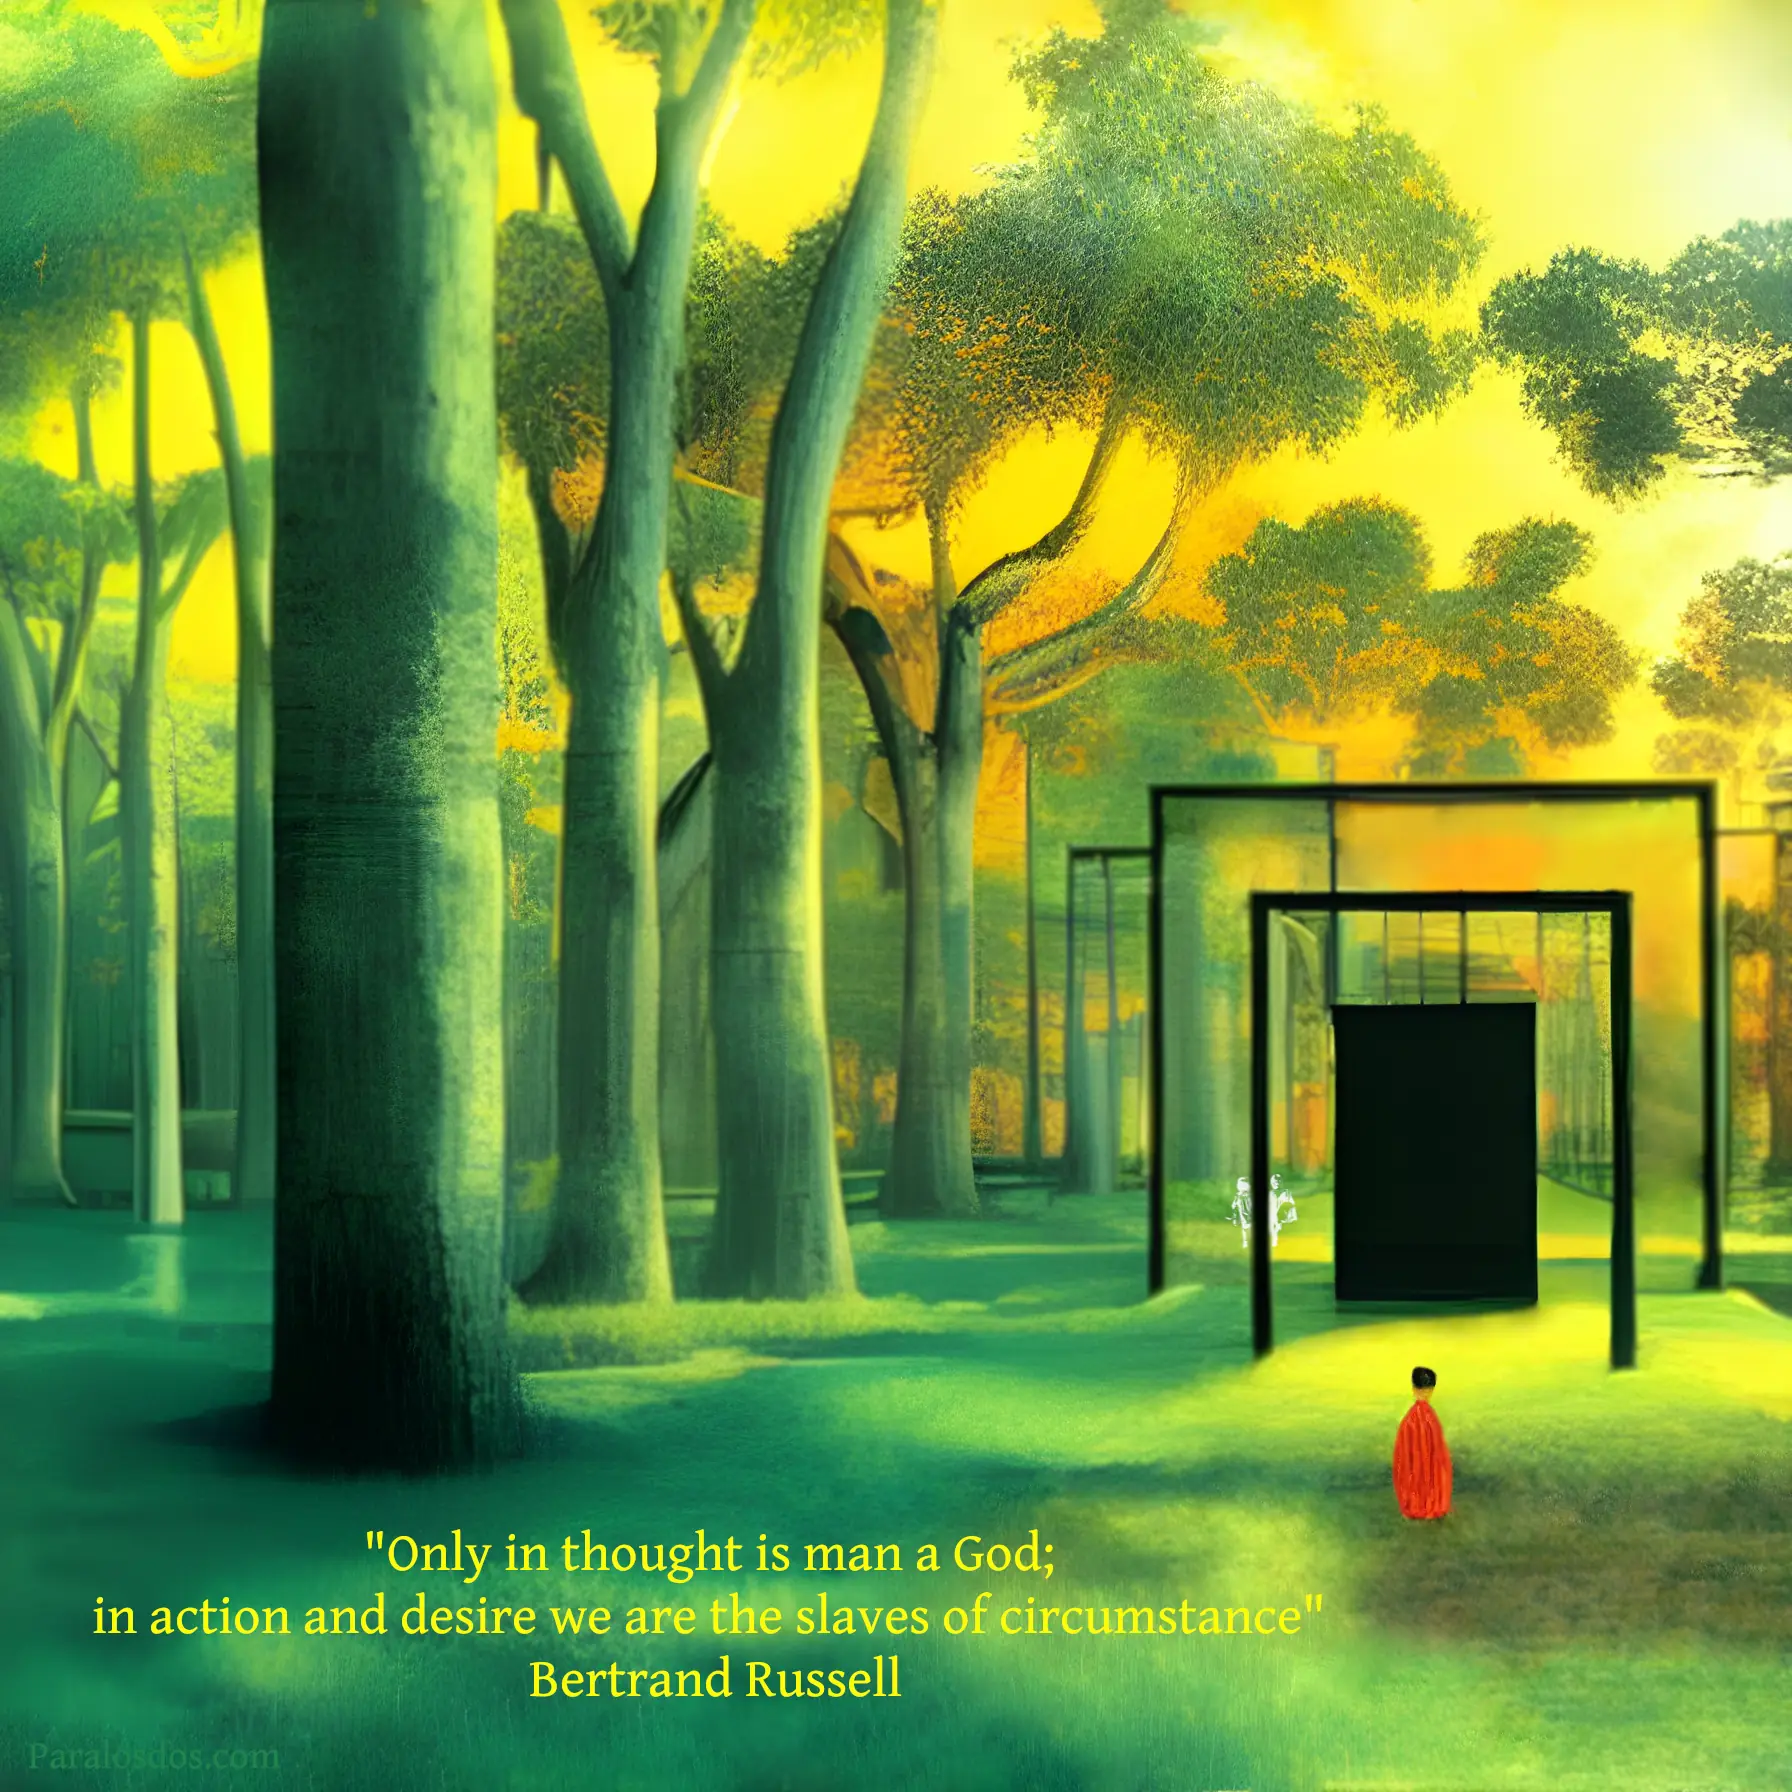 An artistic rendering of a doorway or portal in the forest. A figure stands contemplating the doorway. The quote reads: "Only in thought is man a God; in action and desire we are the slaves of circumstance" Bertrand Russell